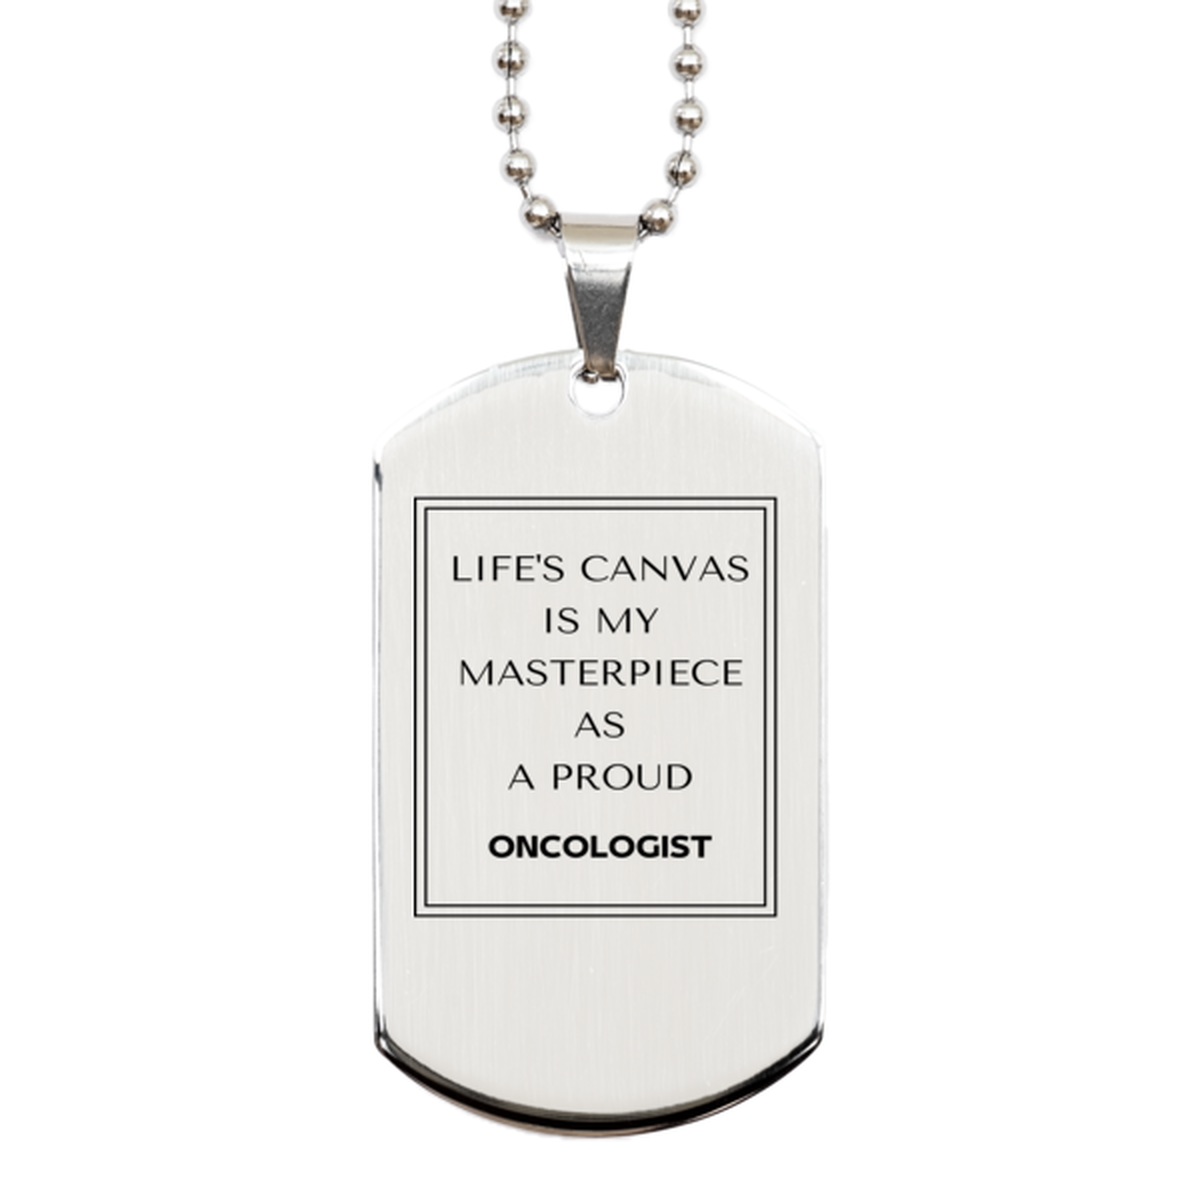 Proud Oncologist Gifts, Life's canvas is my masterpiece, Epic Birthday Christmas Unique Silver Dog Tag For Oncologist, Coworkers, Men, Women, Friends